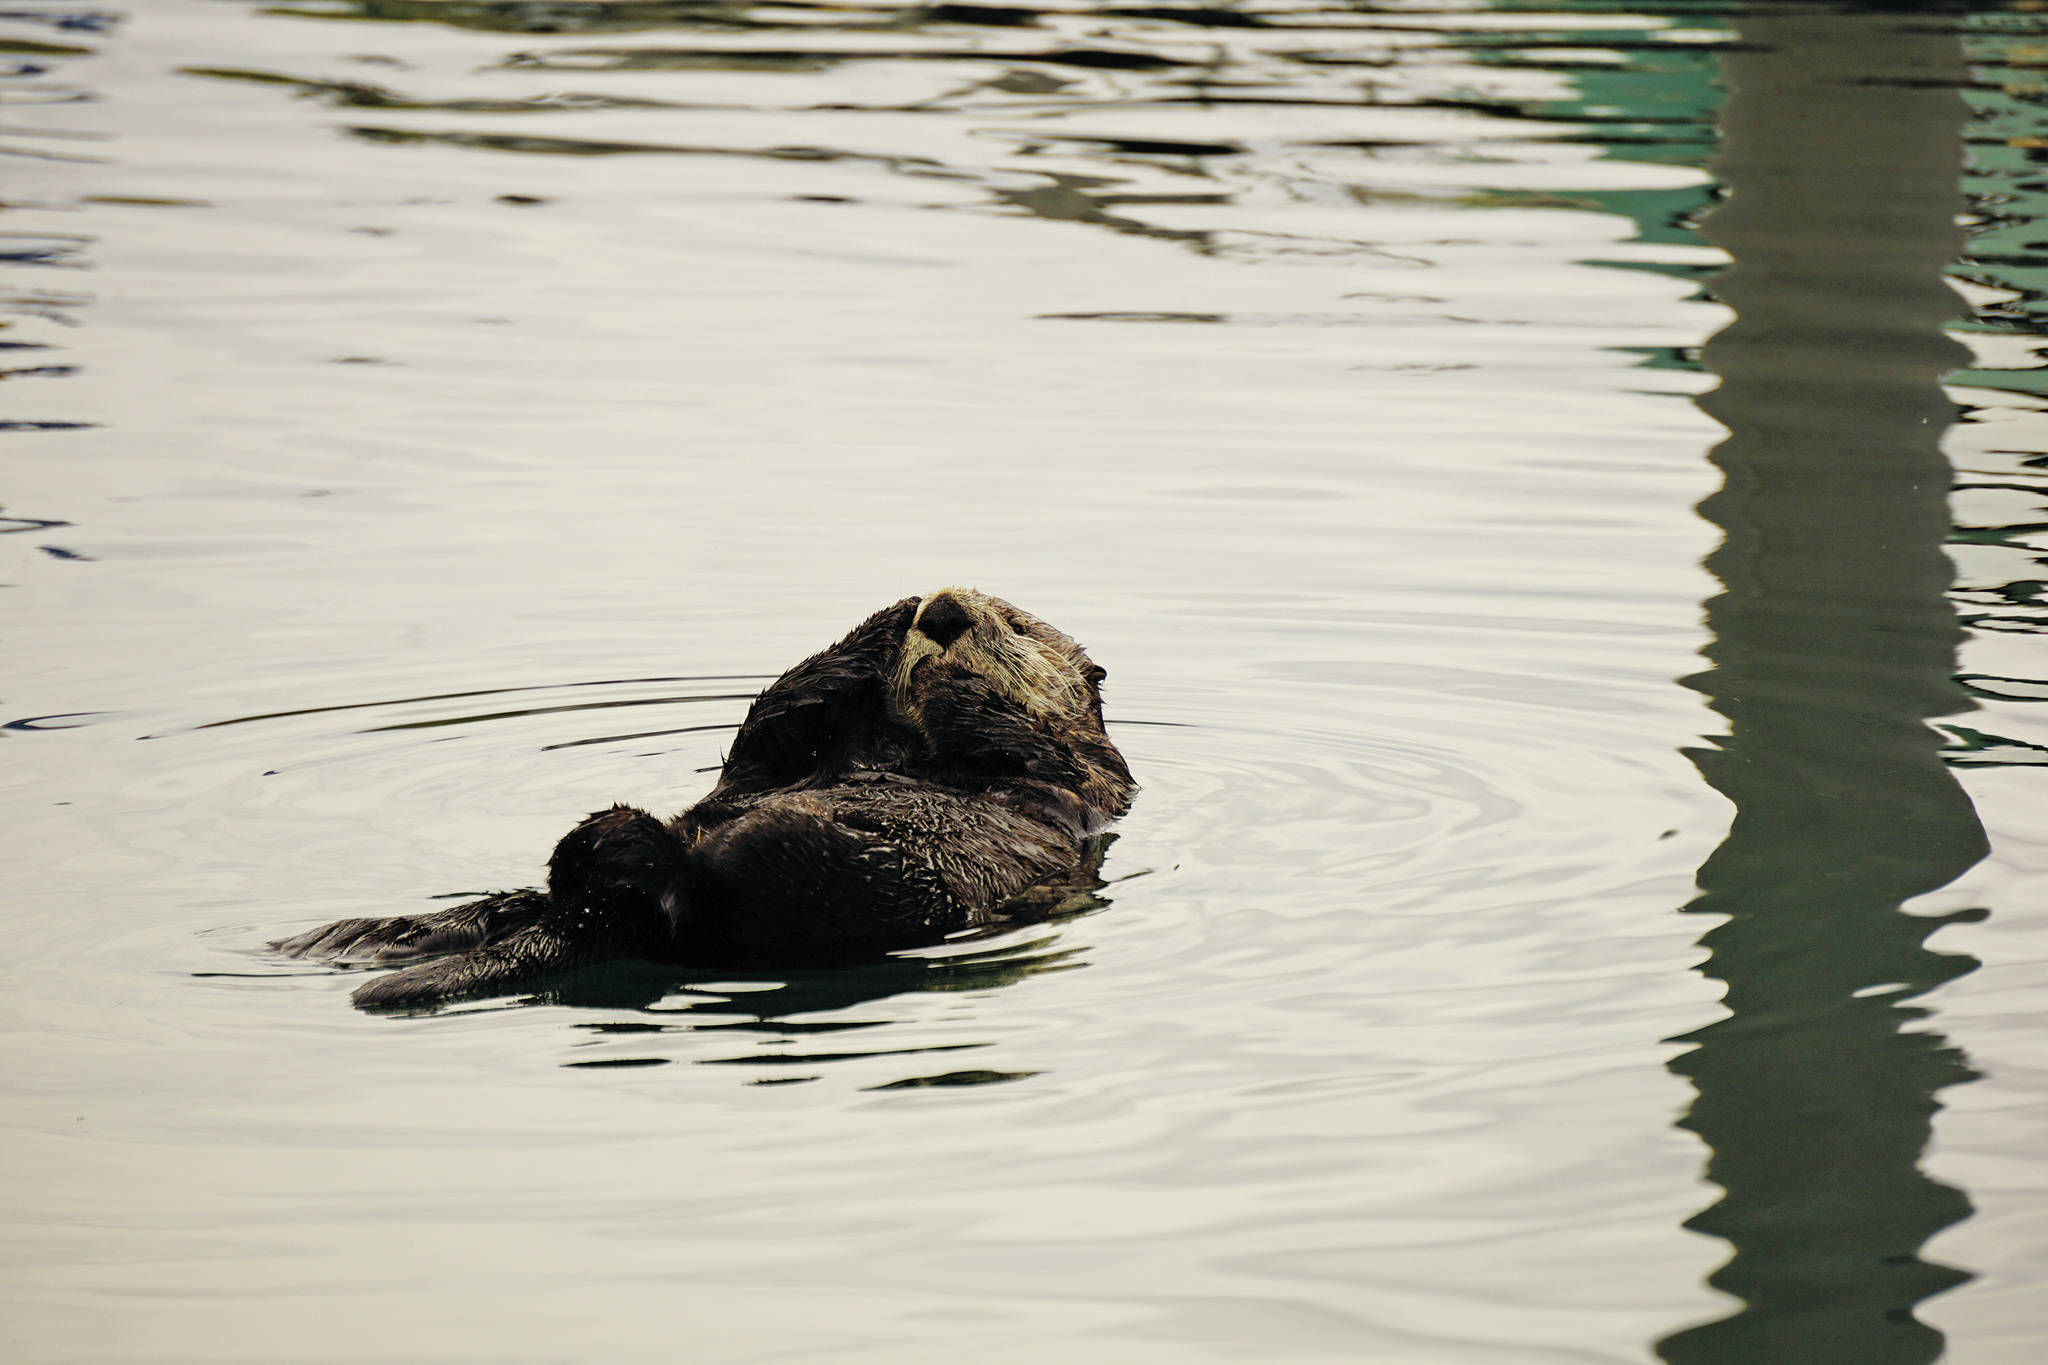 A sea otter swims in the harbor near the load-and-launch ramp on Thursday, Aug. 27, 2020, in Homer, Alaska. (Photo by Michael Armstrong/Homer News)